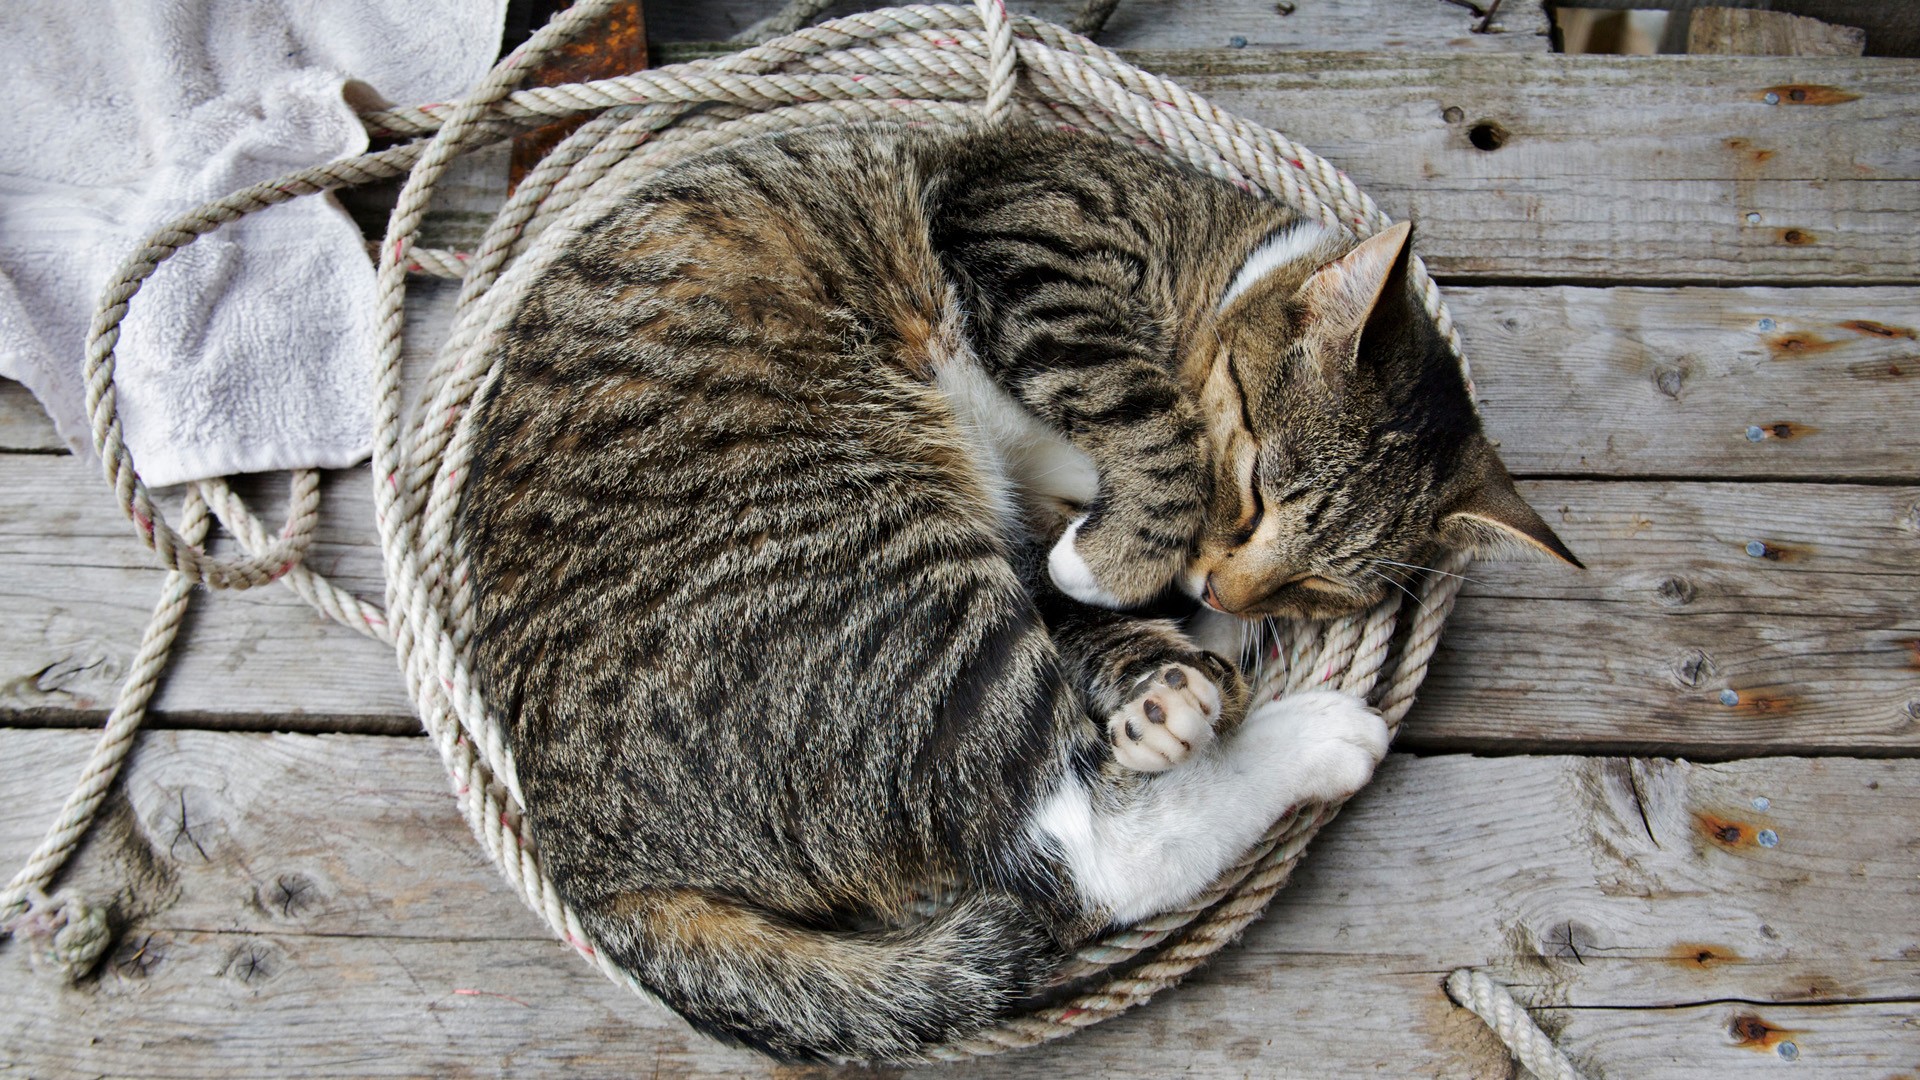 General 1920x1080 cats ropes wooden surface animals sleeping photography mammals feline